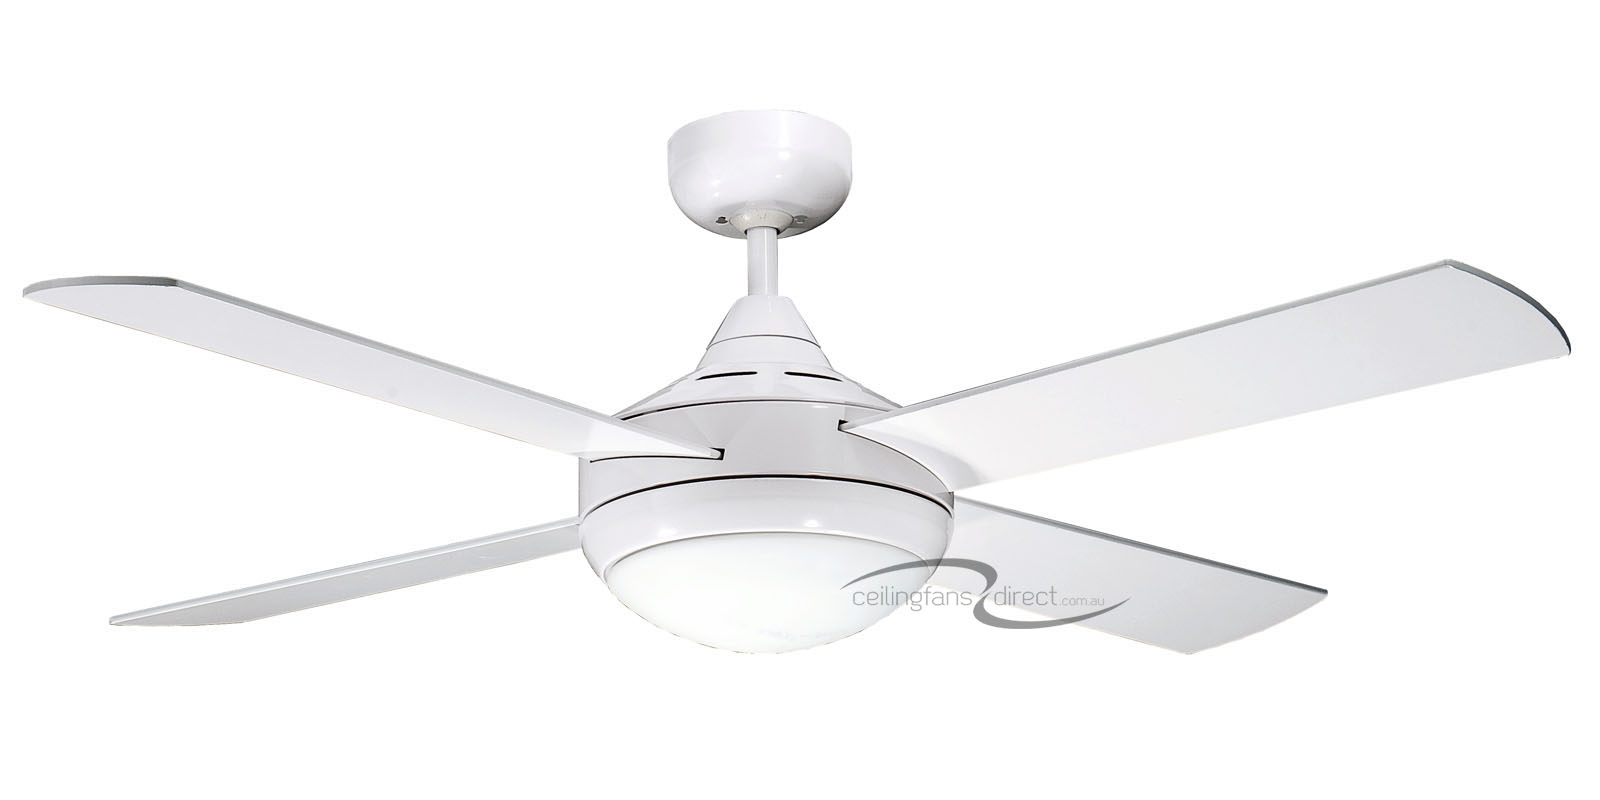 Remote Control Outdoor Ceiling Fan With Light1600 X 800